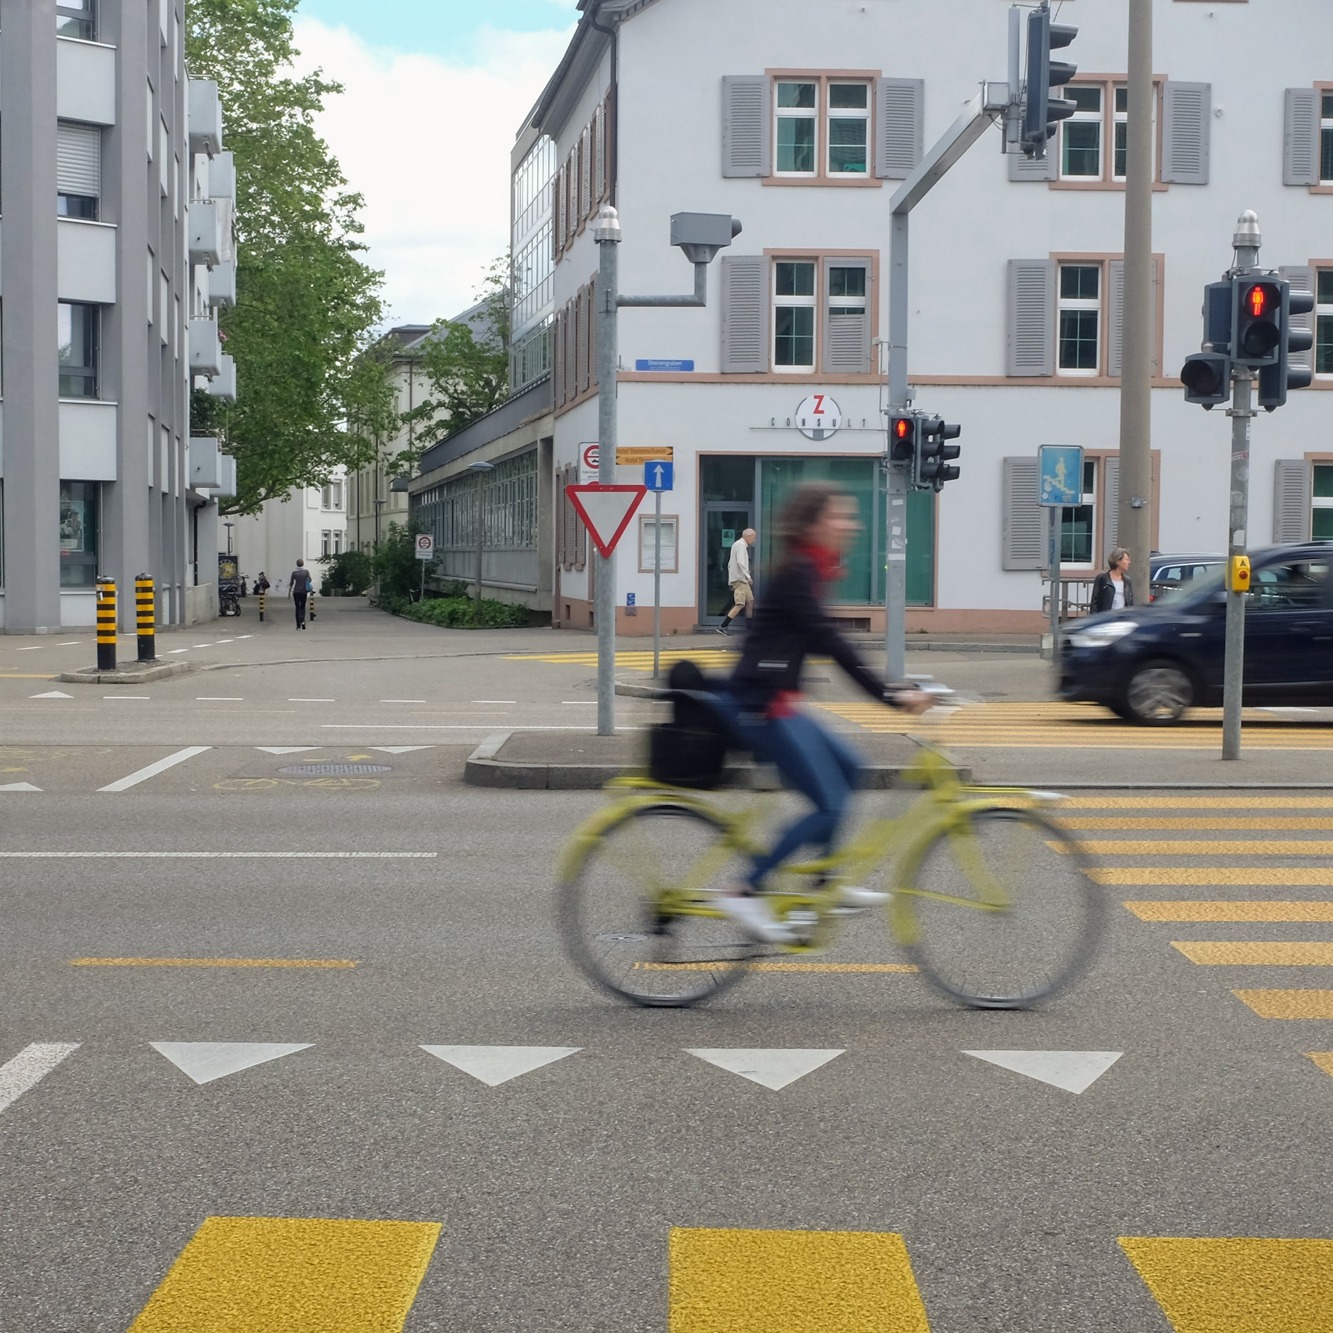 Photo of a street with a cyclist